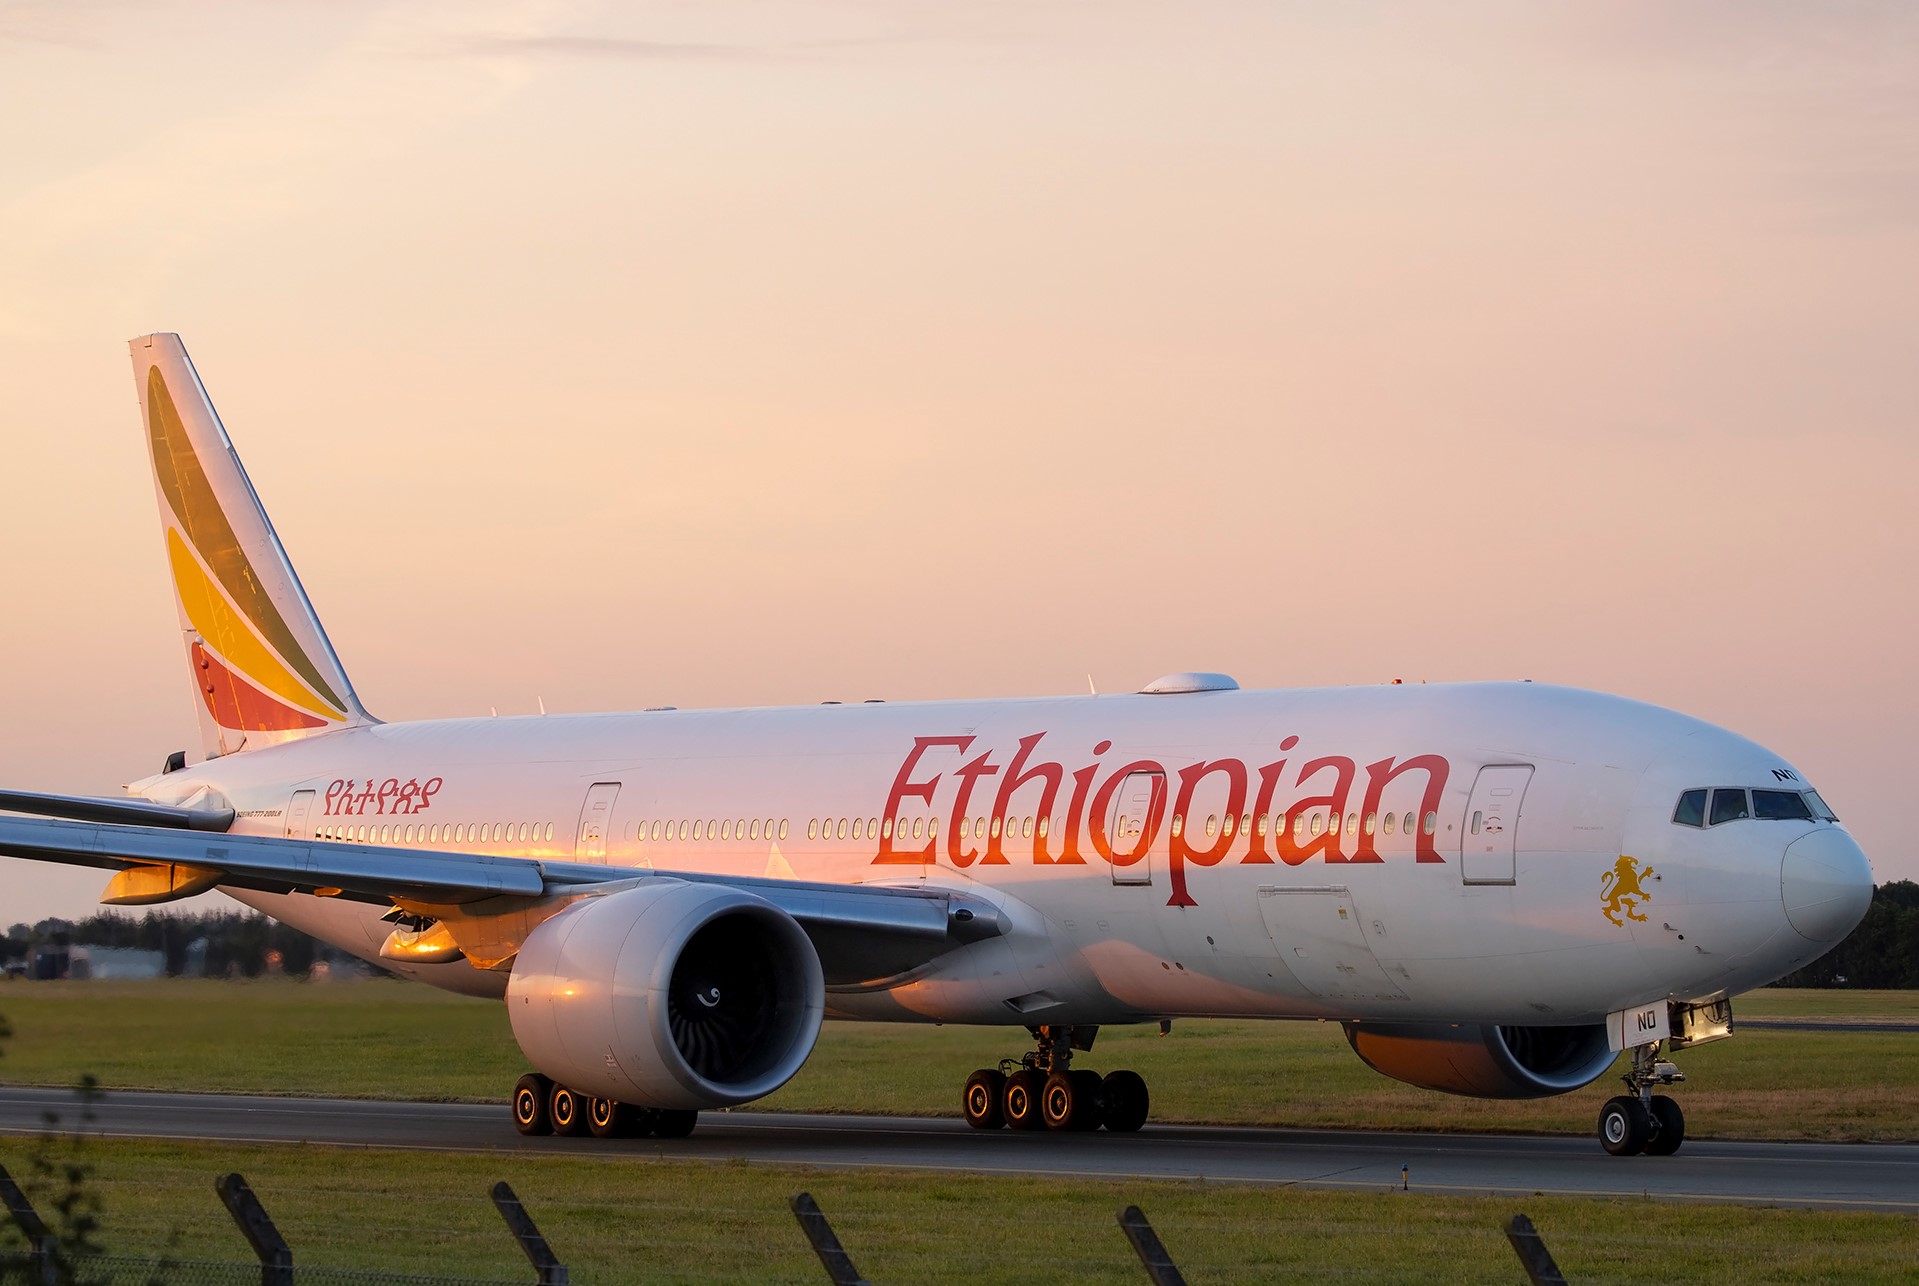 Ethiopian Airlines makes first flight to Tigray in 18 months